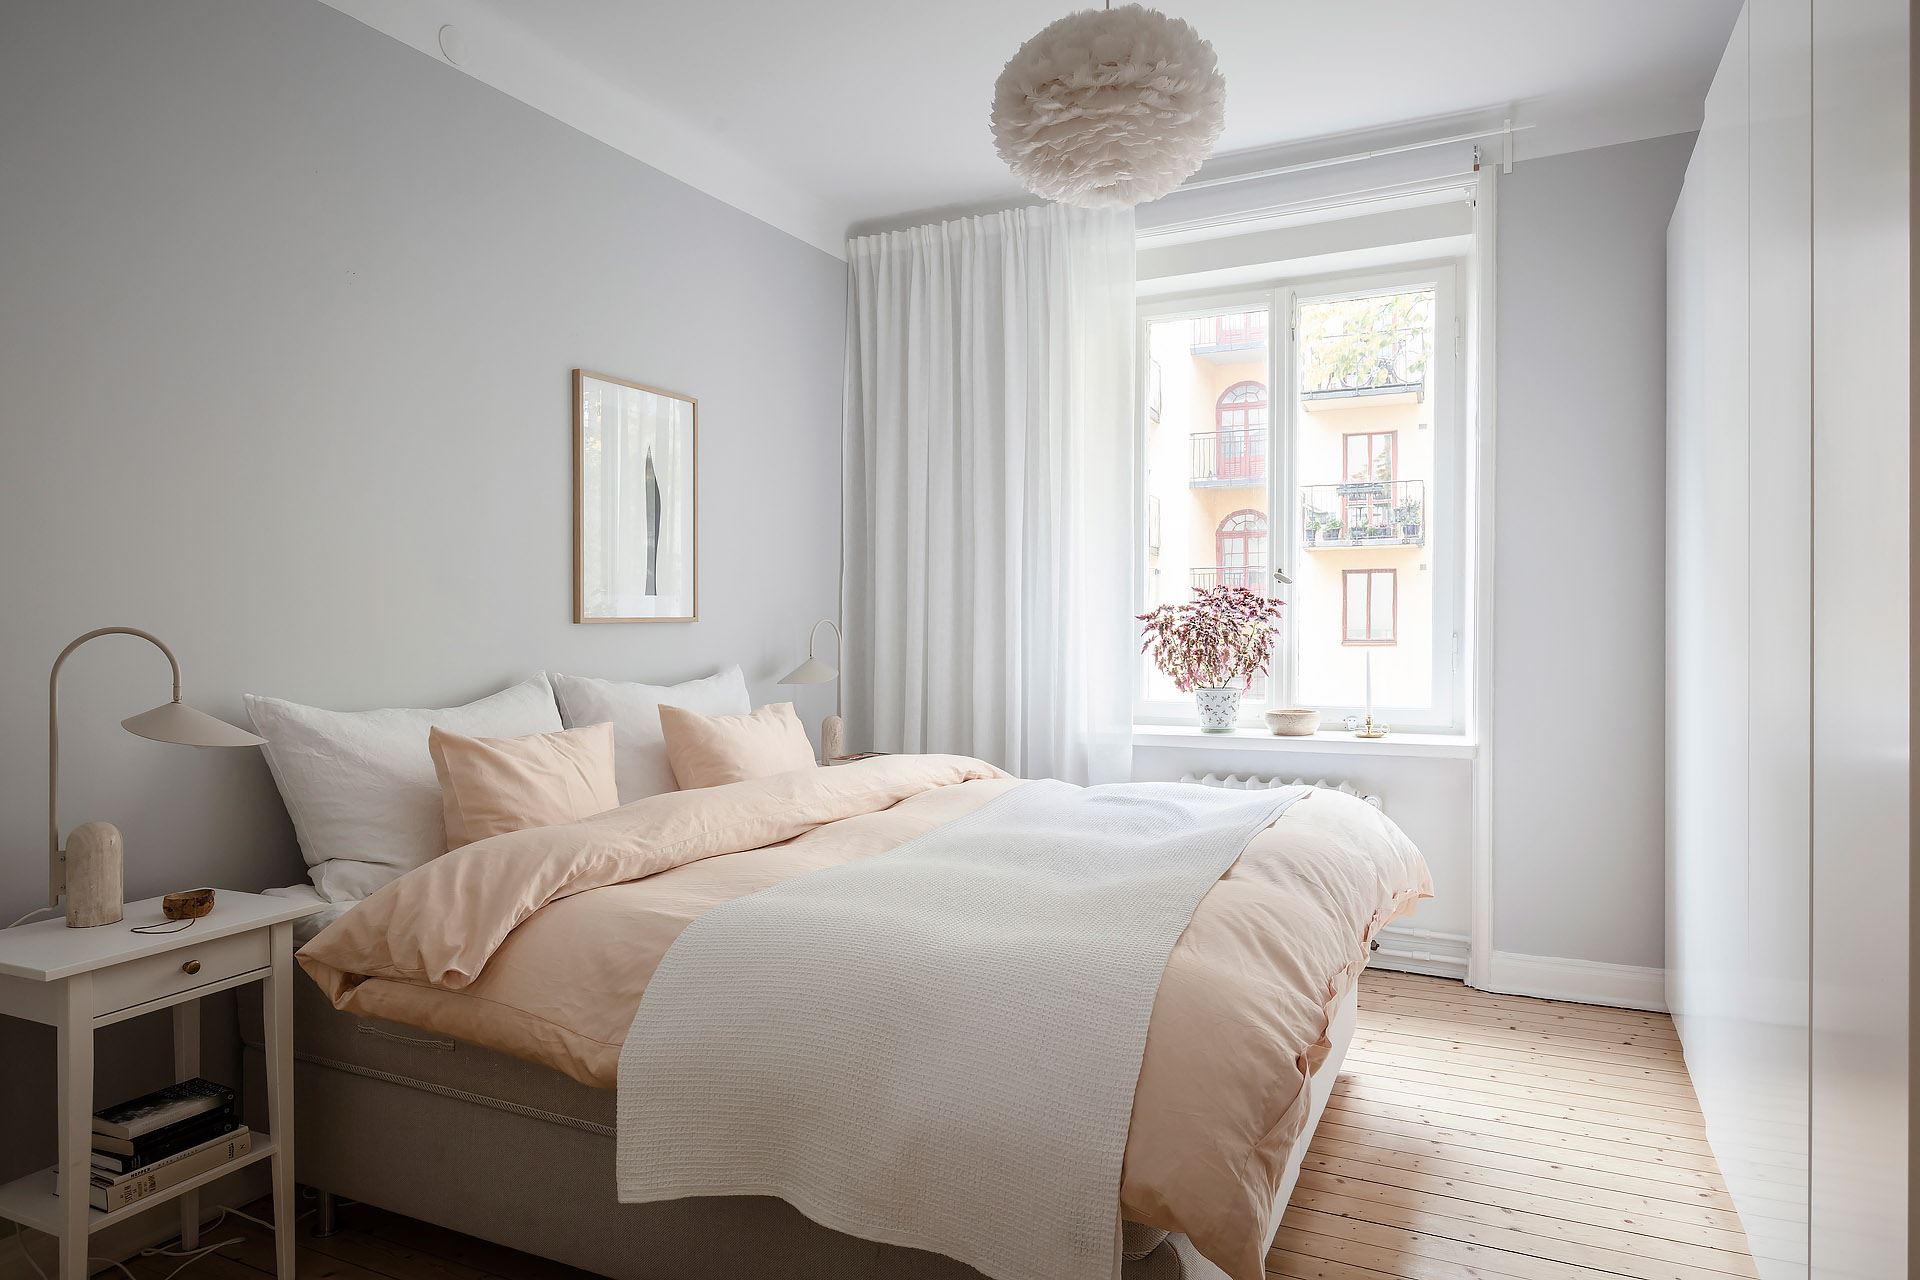 Bright bedroom with a touch of peach - COCO LAPINE DESIGNCOCO LAPINE DESIGN